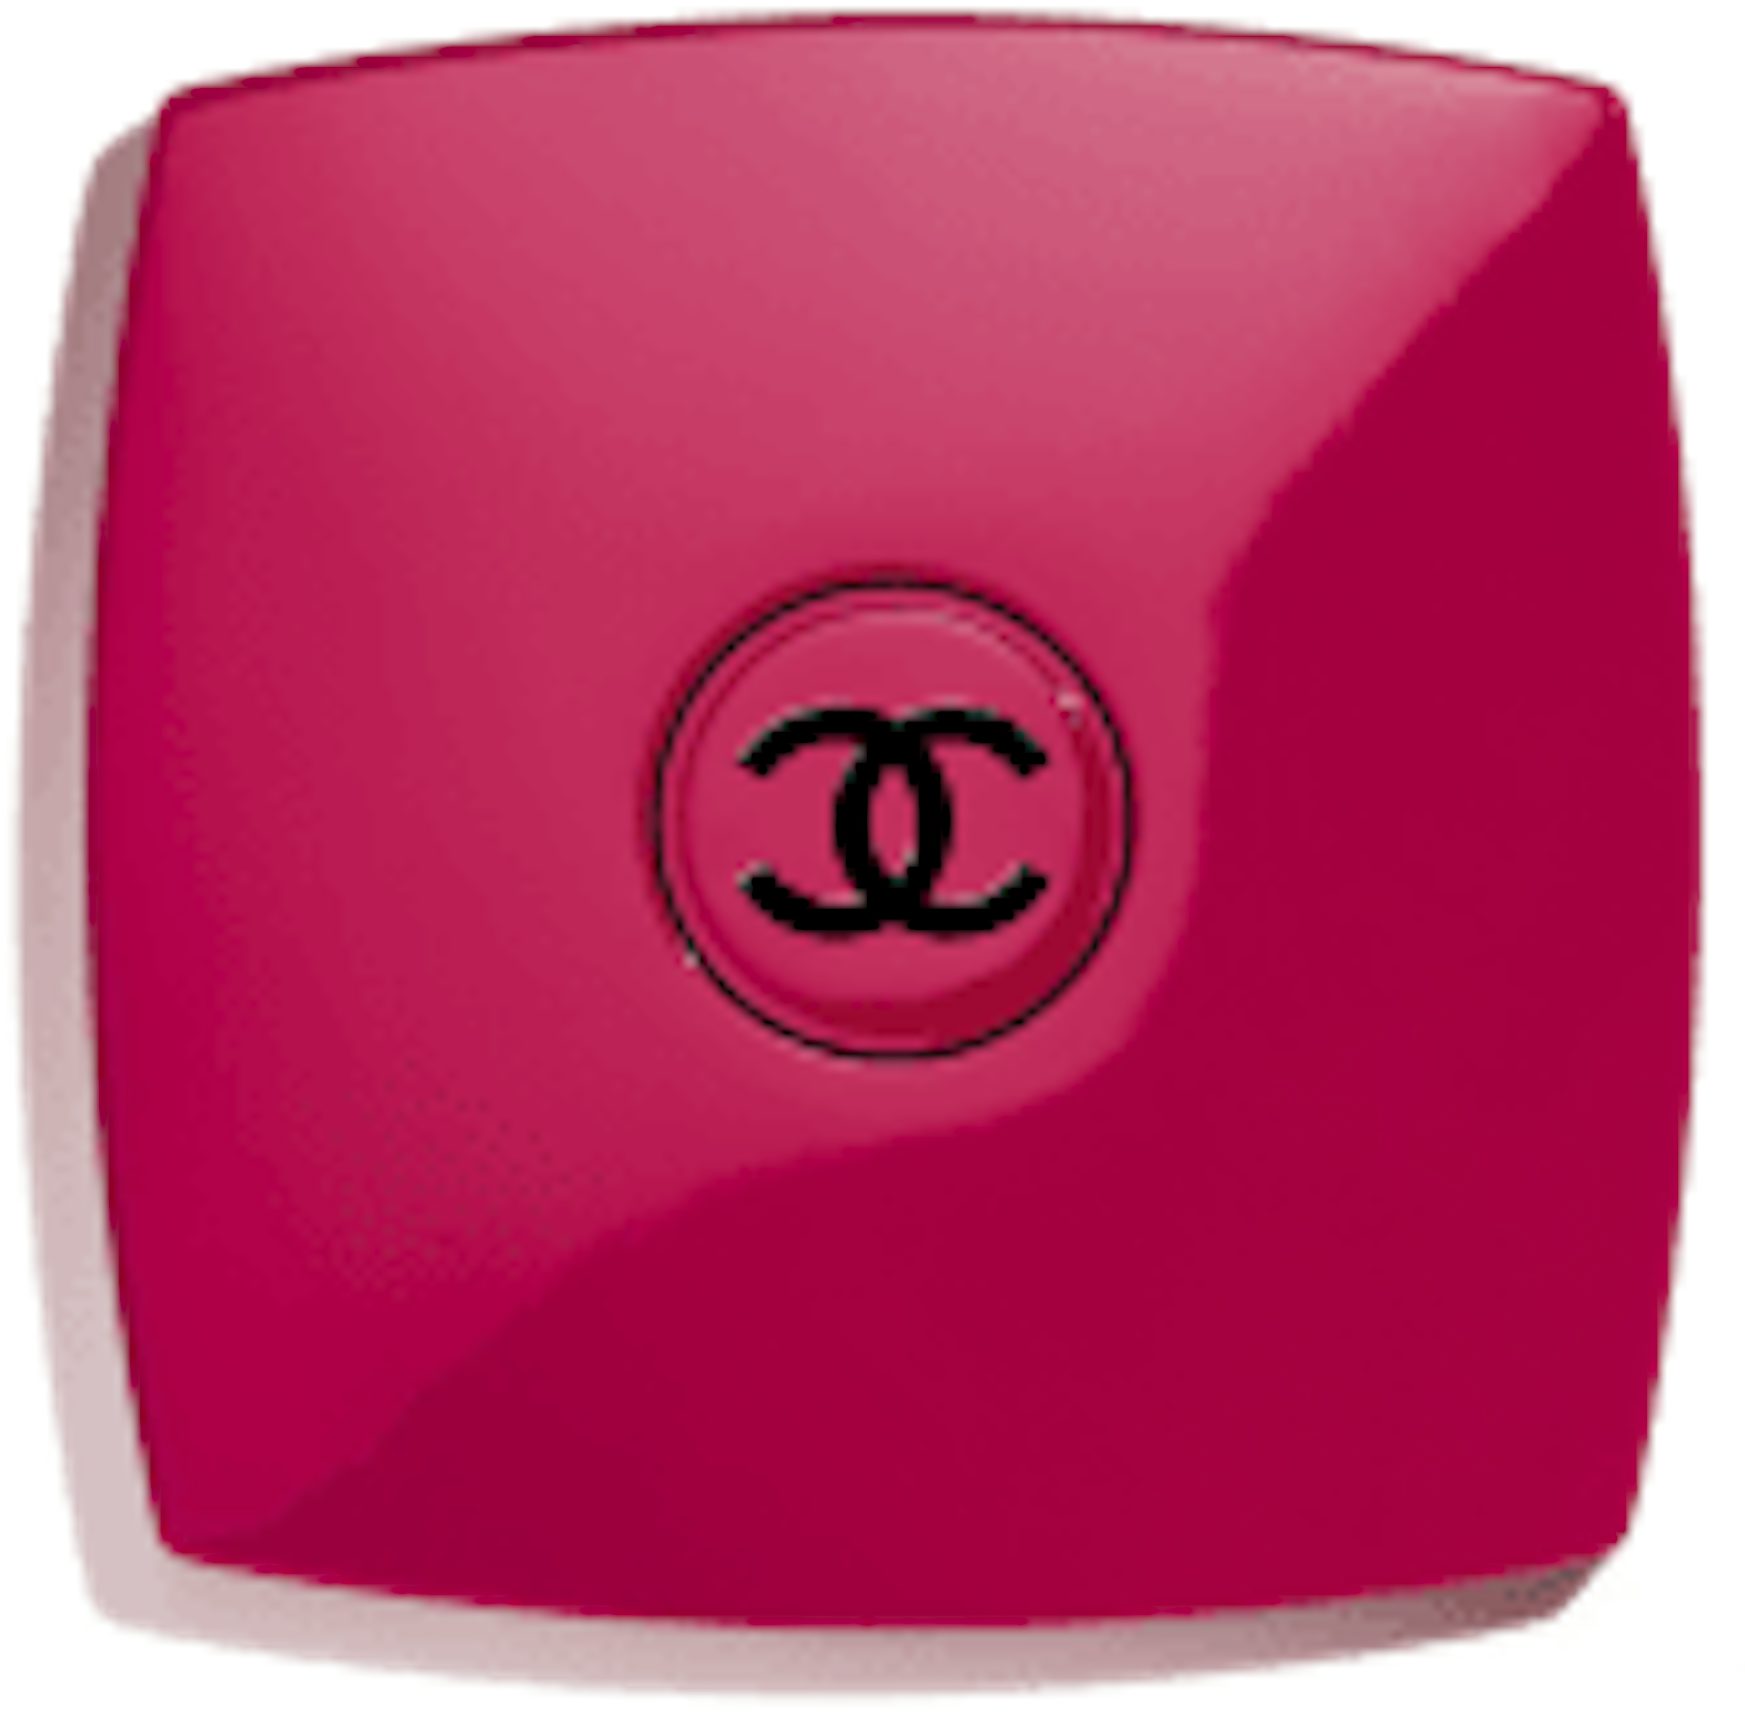 Chanel Codes Couleur Limited-Edition Mirror Duo 143 - DIVA in